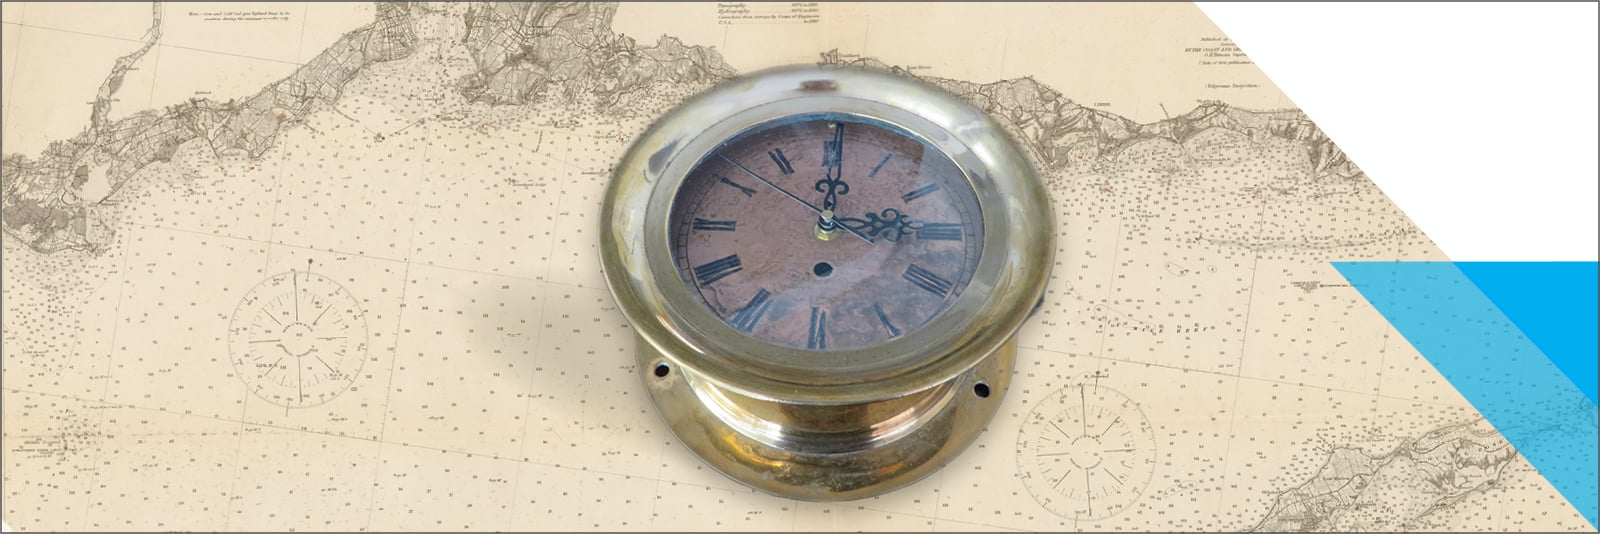 Ashcroft Nautical Clock and Other Instruments Recovered from the Sea